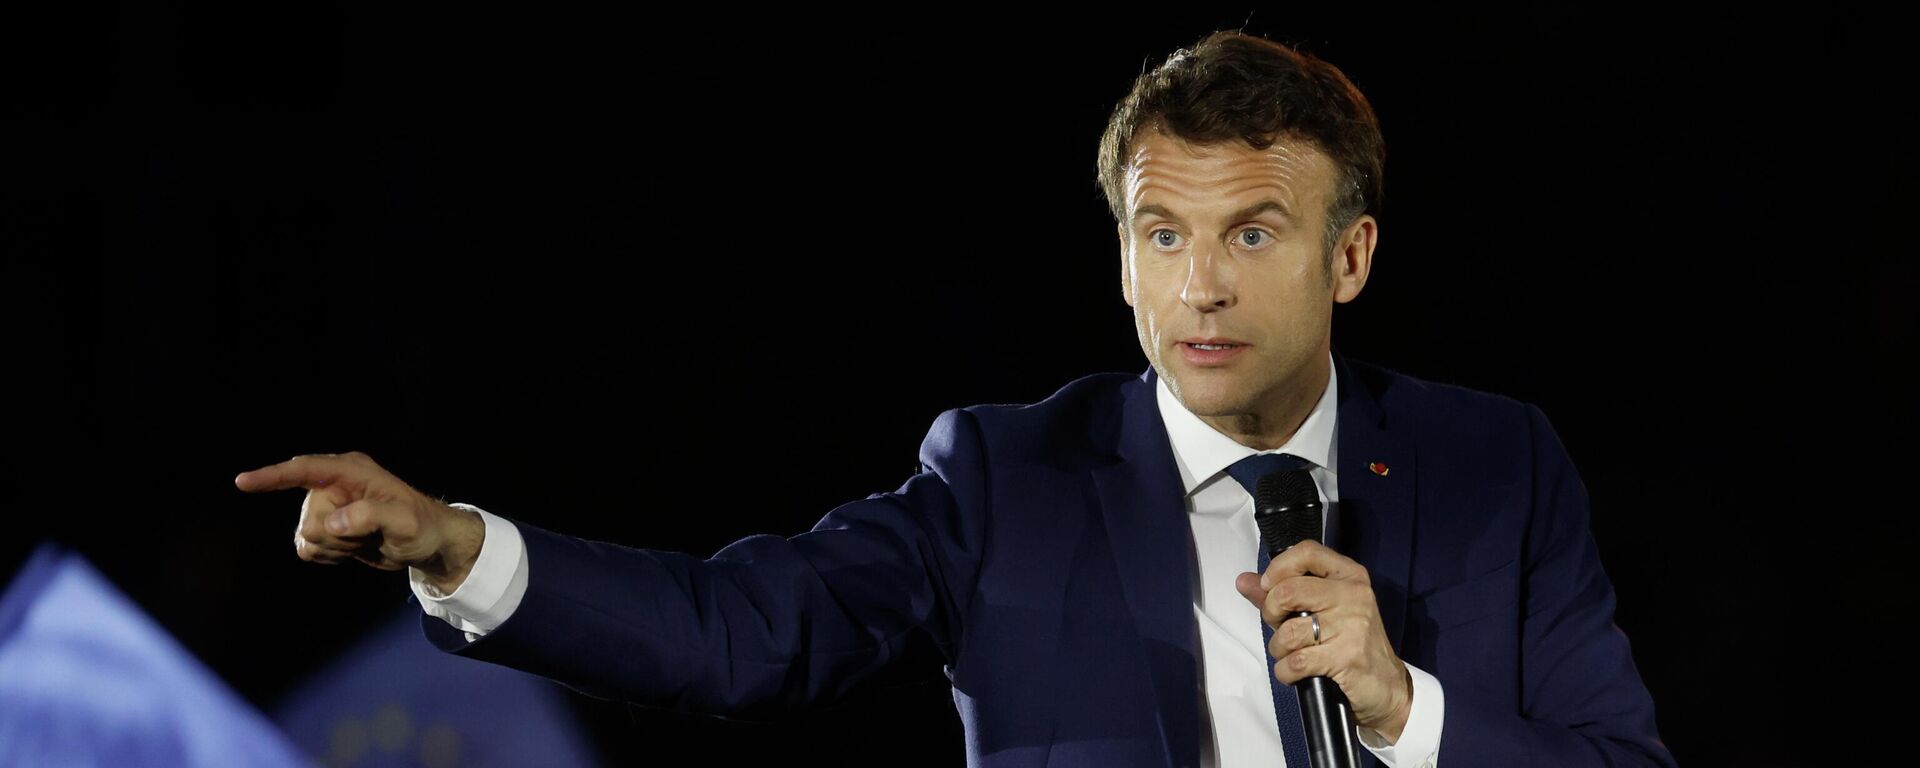 Current French President and centrist presidential candidate for reelection Emmanuel Macron delivers a speech during a campaign rally in Strasbourg, eastern France, Tuesday, April 12, 2022 . Macron, with strong pro-European views, and far-right candidate Marine Le Pen, an anti-immigration nationalist, are facing each other in the presidential runoff on April 24. (AP Photo/Jean-Francois Badias) - Sputnik International, 1920, 08.11.2022